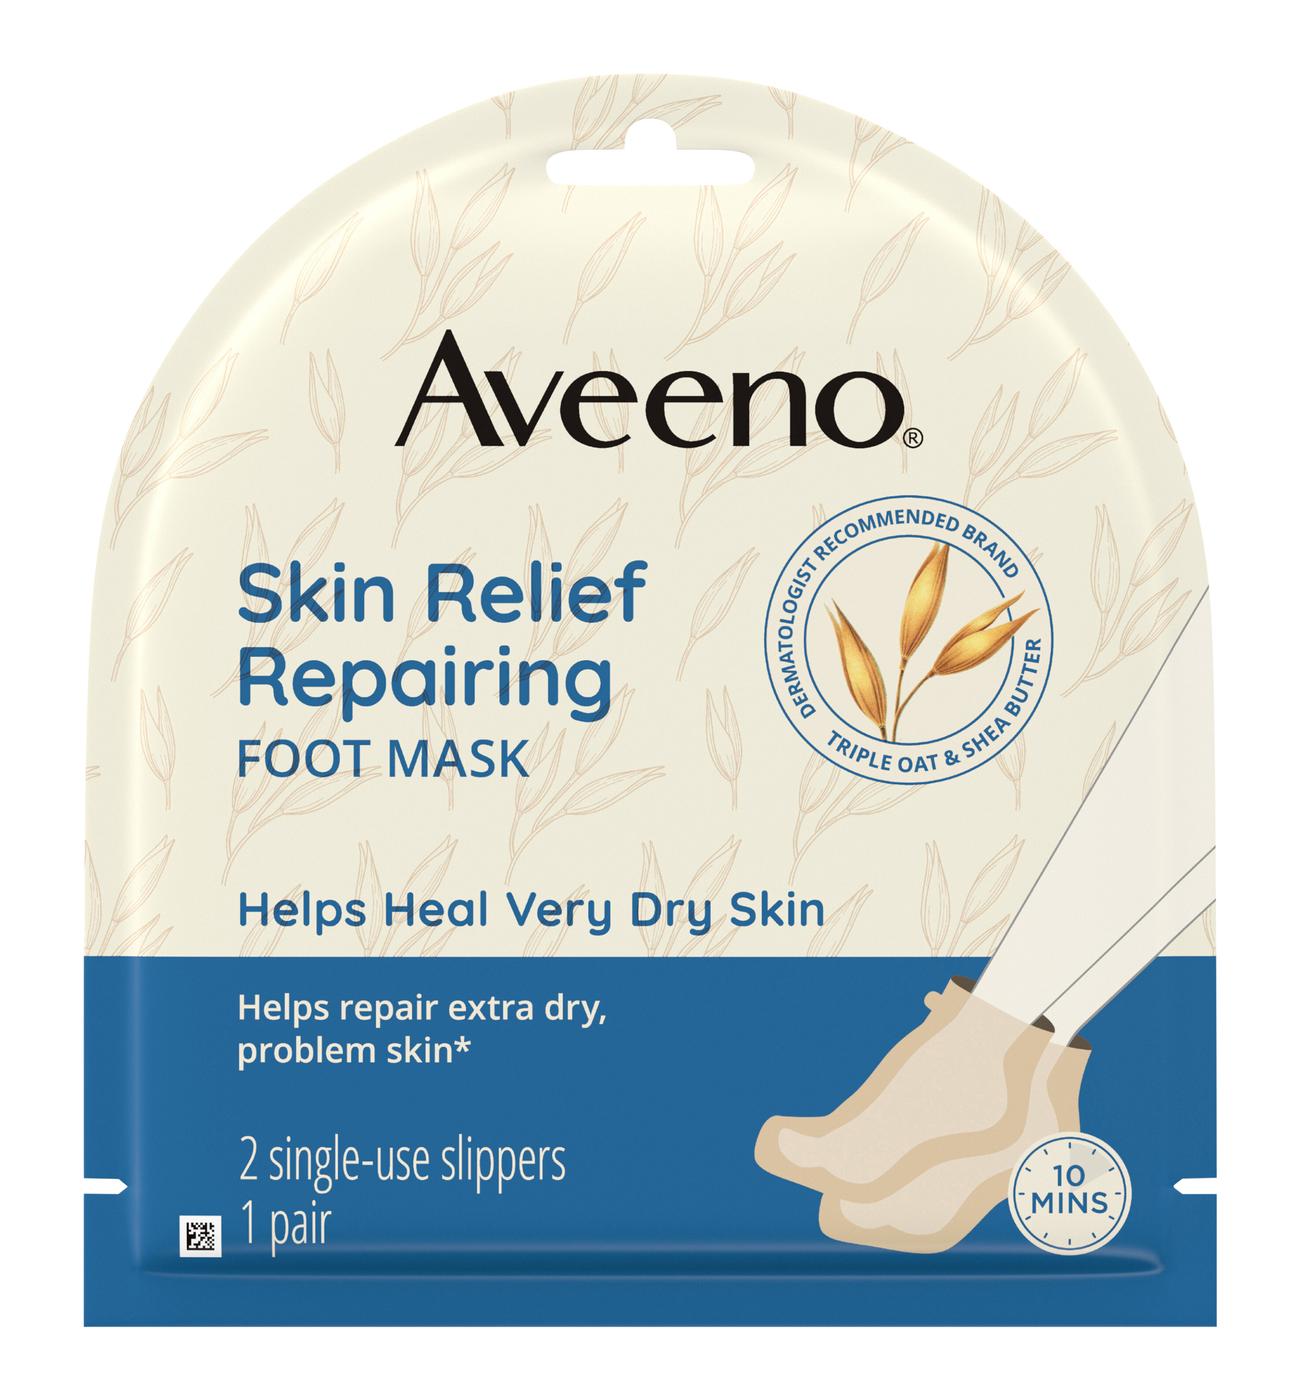 Aveeno Skin Relief Repairing Foot Mask 2 Single-Use Slippers; image 1 of 3